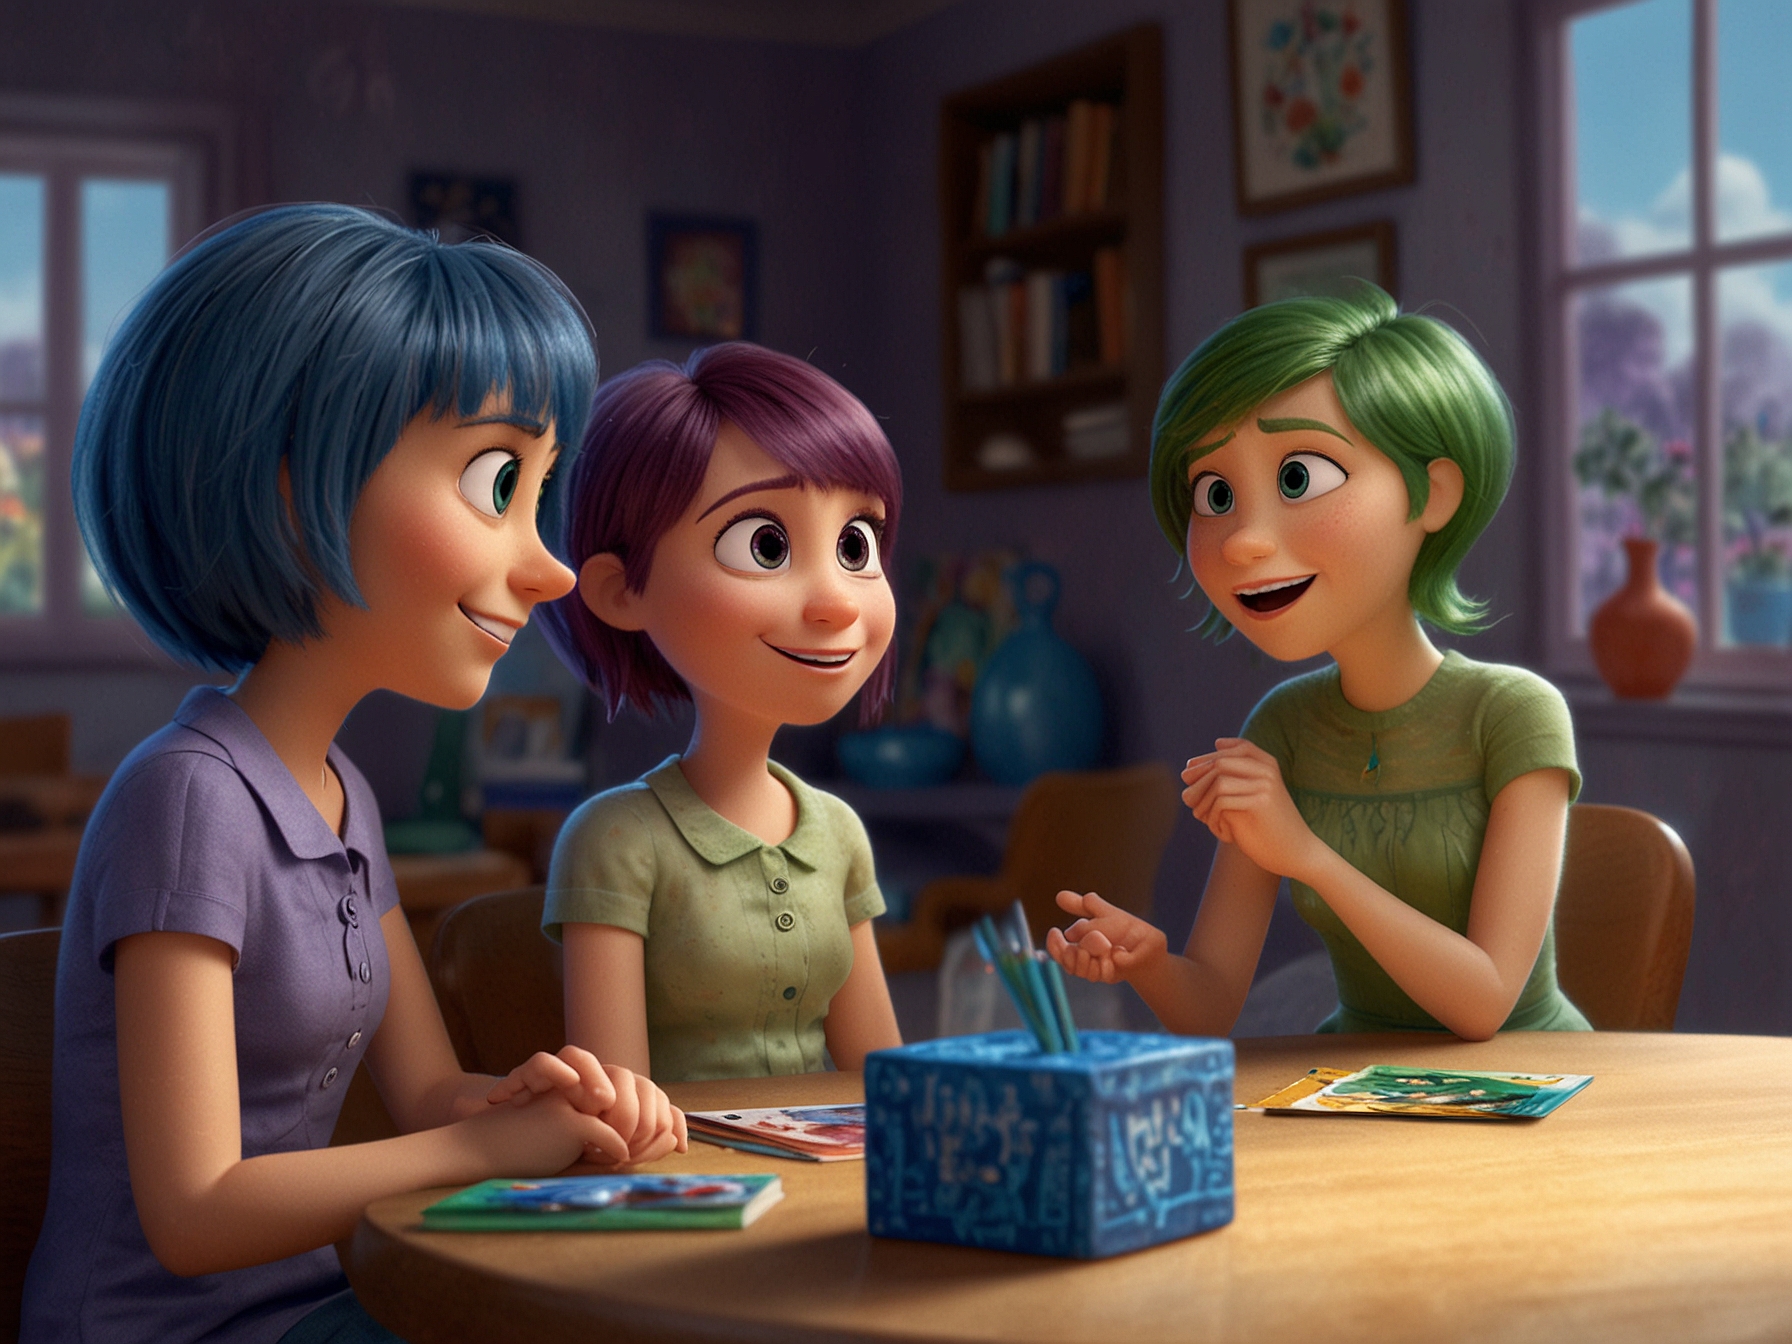 A group of diverse characters from 'Inside Out 2' engaging in a heartfelt moment, capturing the movie's blend of humor and poignant insights into personal growth.